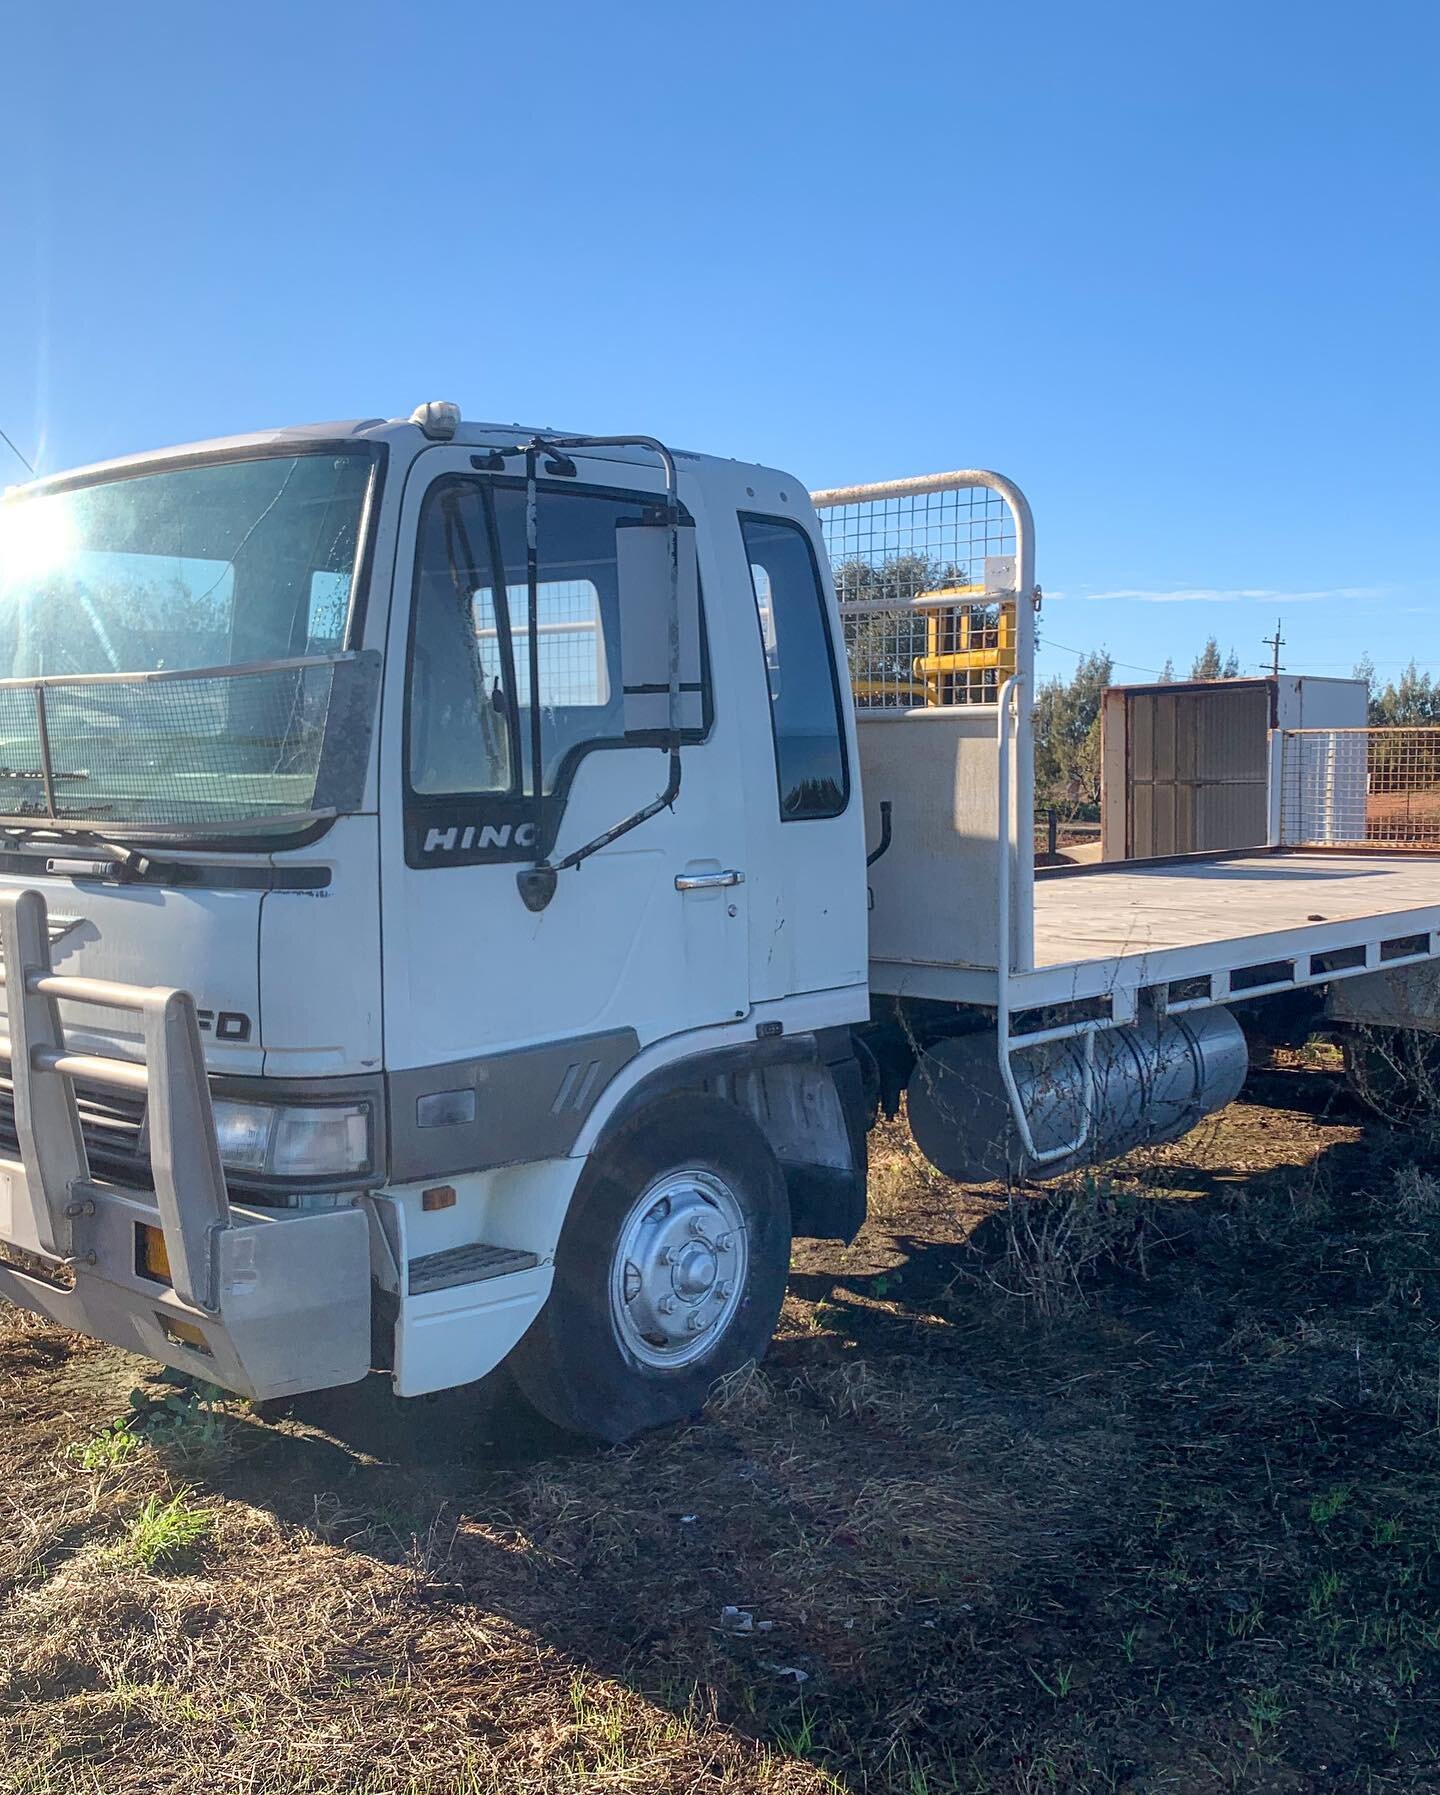 2ND HAND MACHINERY FOR SALE &ndash; 

Surplus machinery now available for sale due to upcoming farm listing

All items POA with Genuine Interest only. GST and 2% Buyers premium applicable.

📞 Call Grant on 0418916031